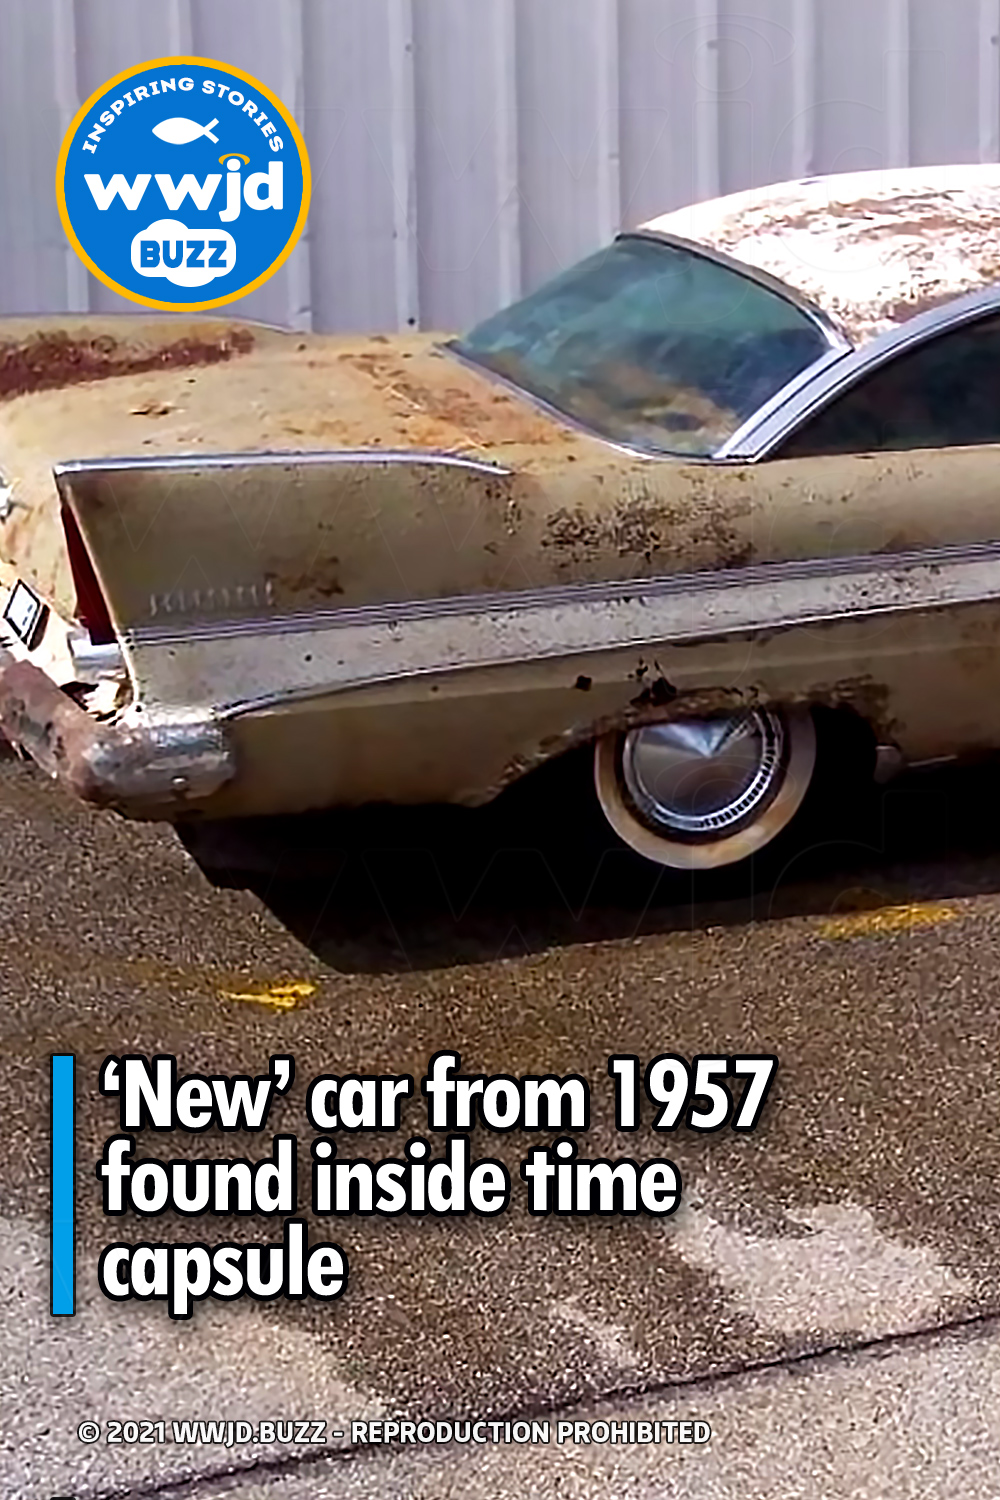 ‘New’ car from 1957 found inside time capsule